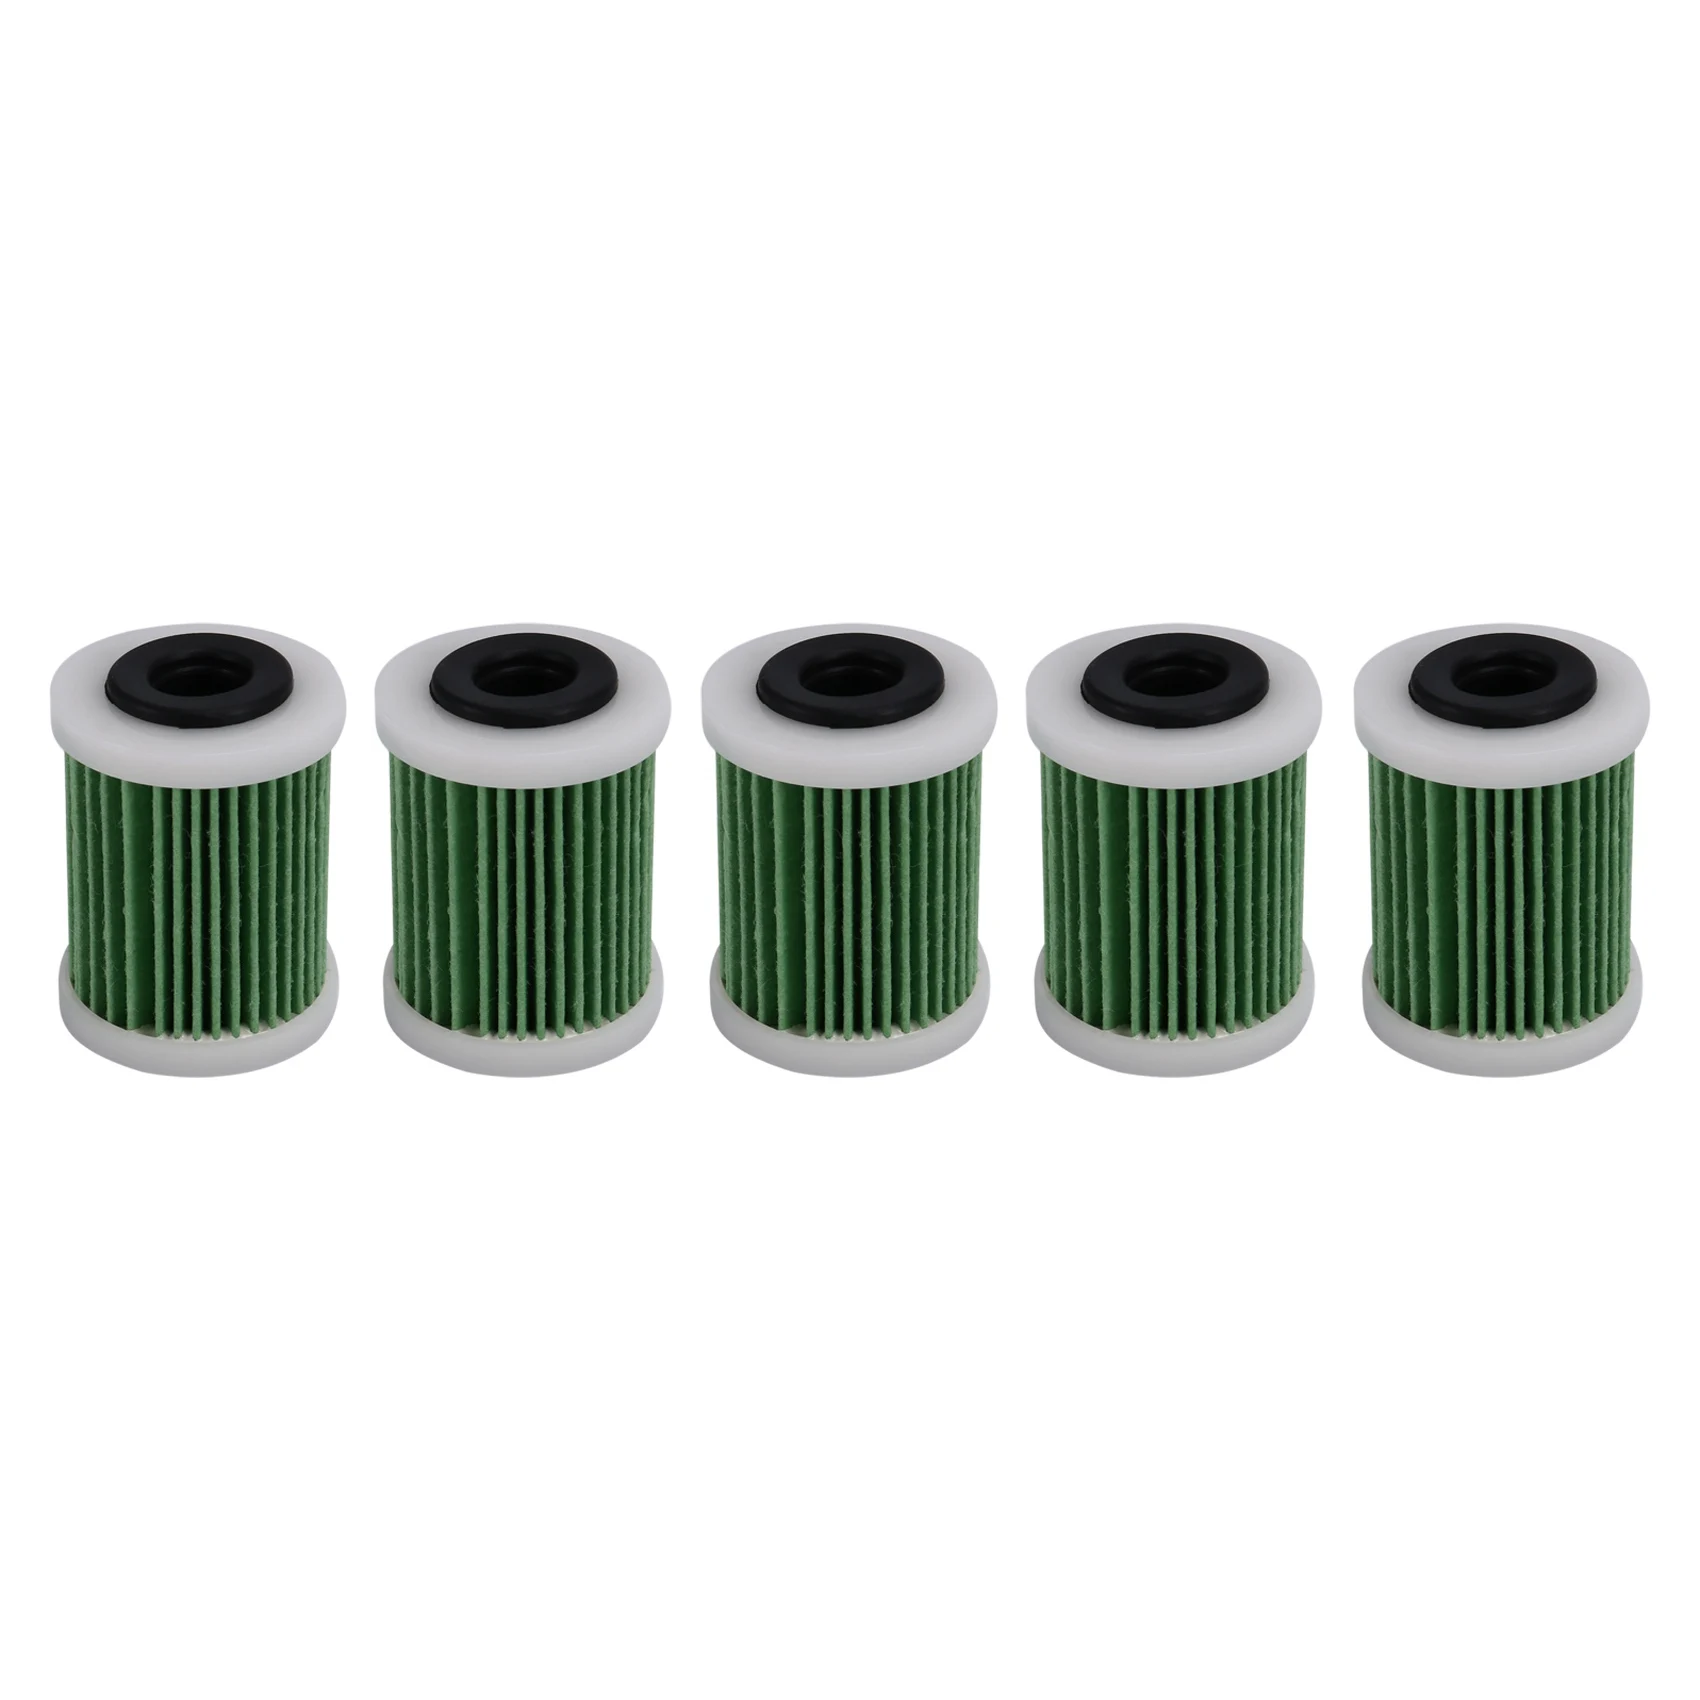 

5Pcs Fuel Filter 6P3-WS24A-01-00 for Yamaha Outboard Engine 150Hp 200Hp 225Hp 250Hp 425Hp 6P3-24563-01-00 VZ150 to VZ300